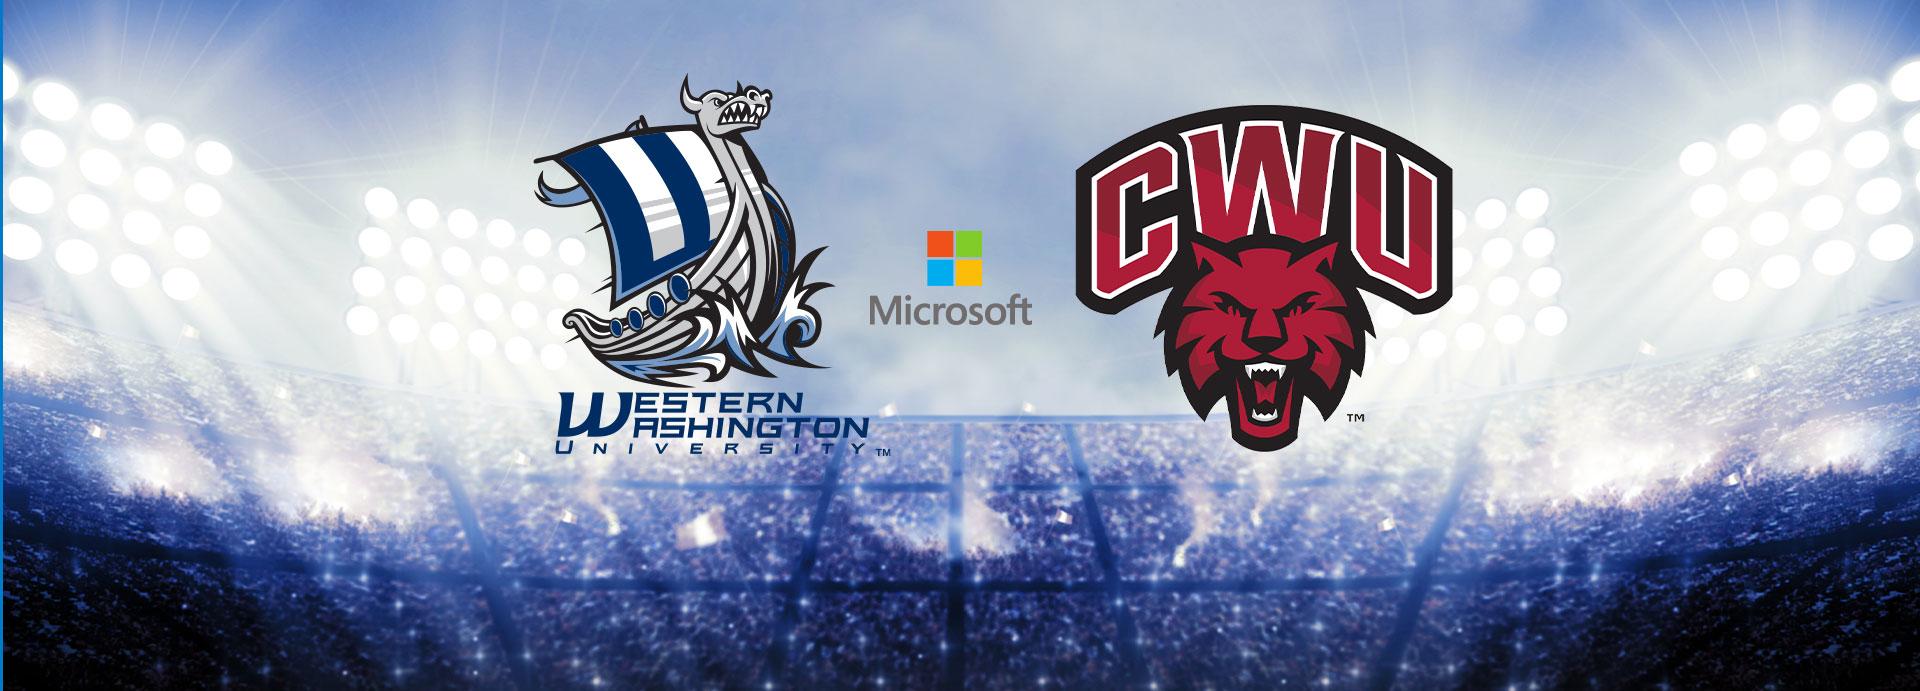 WWU Viking logo, Microsoft logo, and the Central Wildcats logo in a stadium full of people with stadium lights